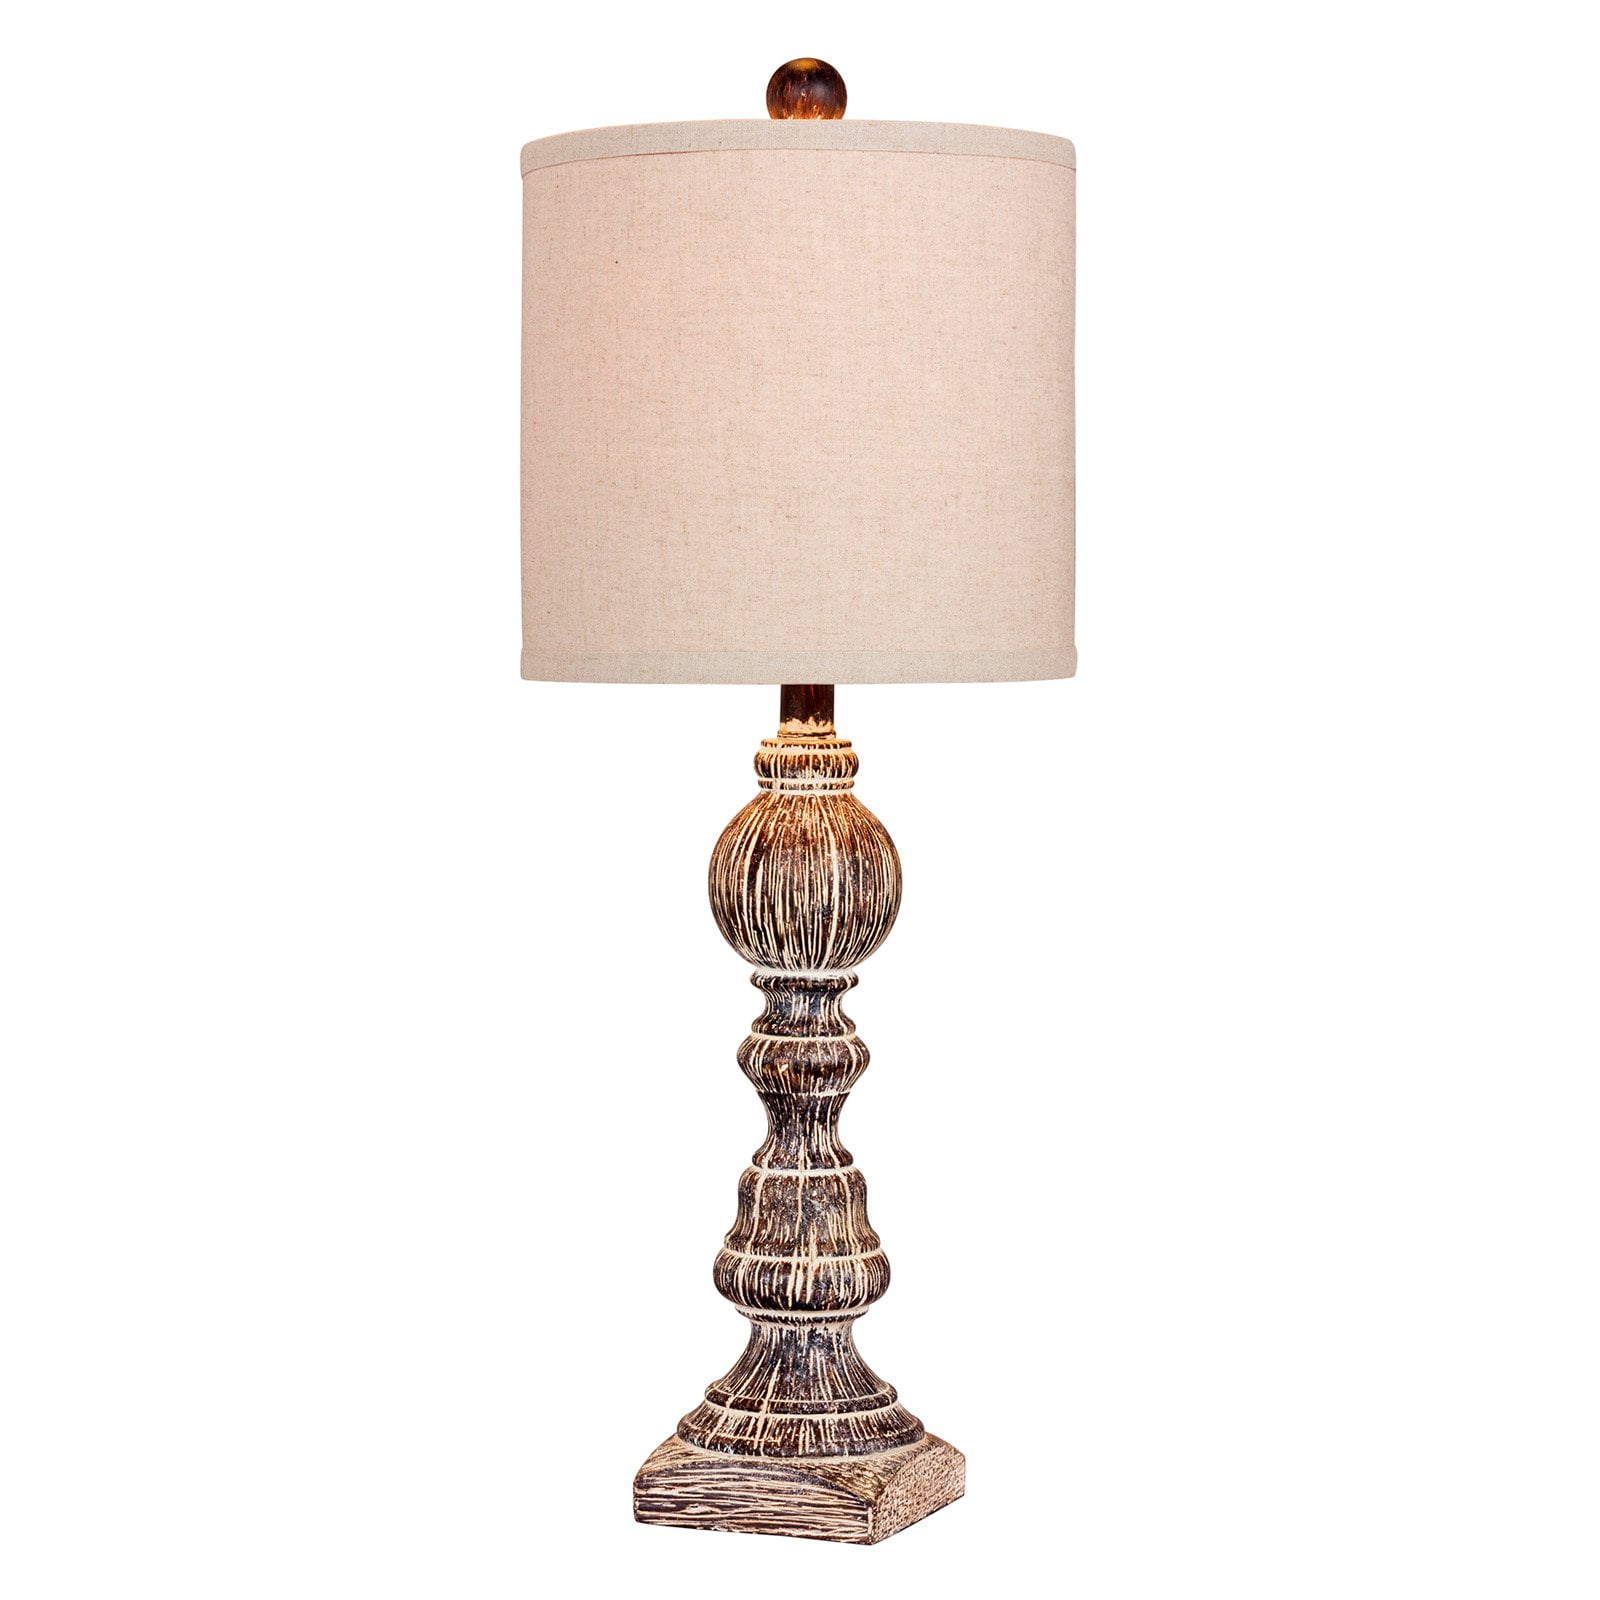 Plated Brushed Nickel Fangio Lighting Cory Martin W-1483BN-2PK Two 26.5 Metal Table Lamps for The Price of One